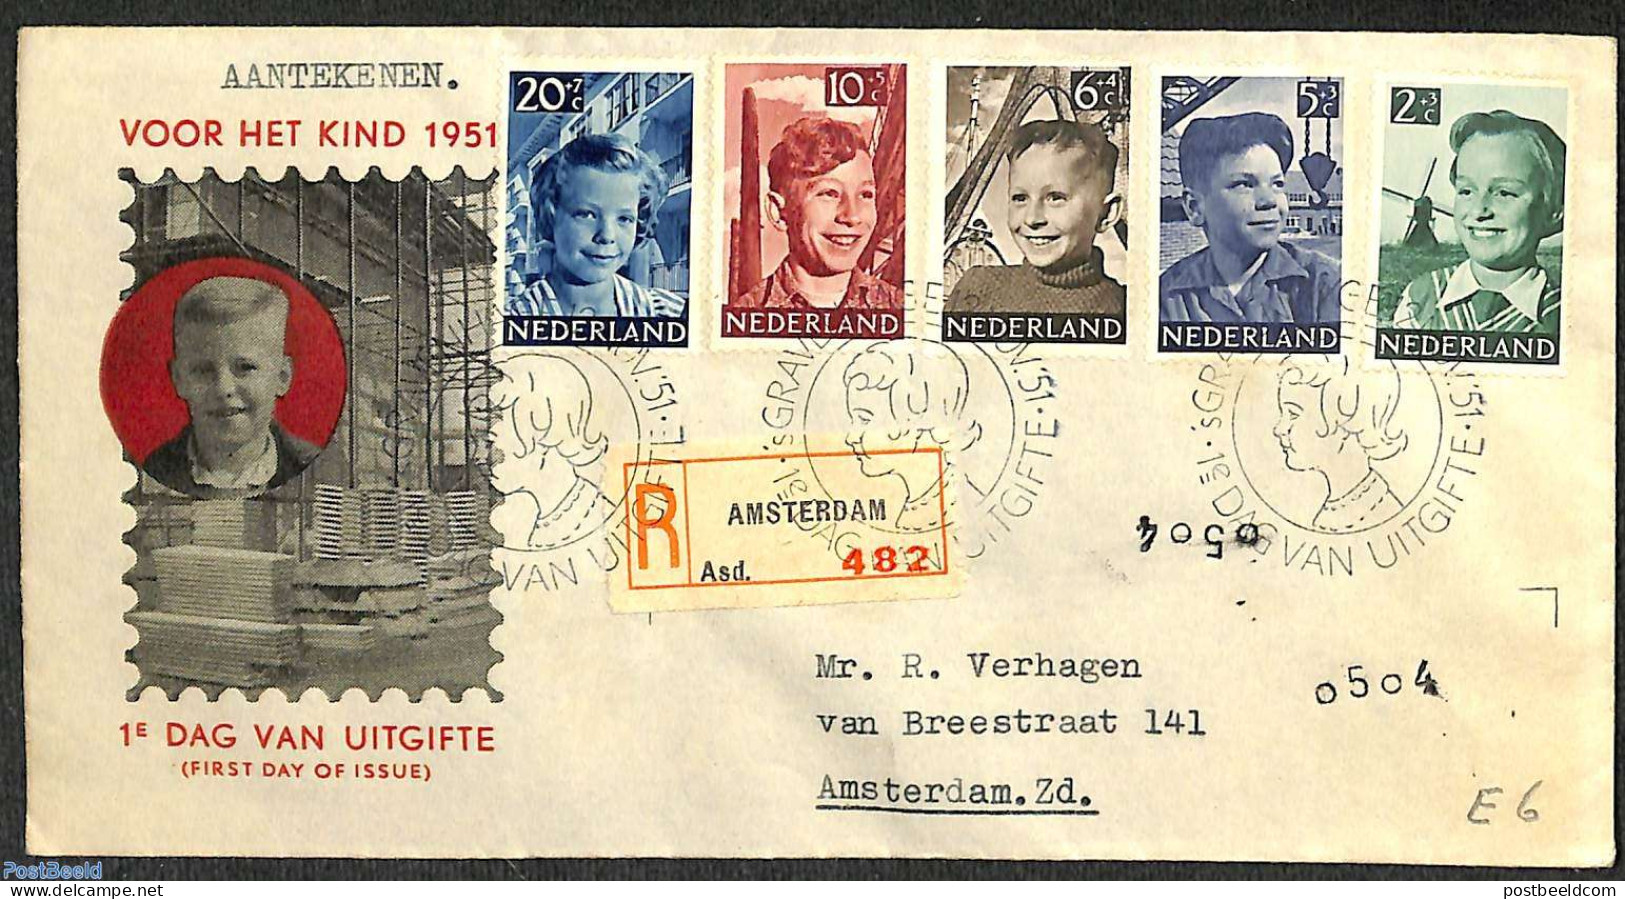 Netherlands 1951 Child Welfare 5v, FDC, Closed Flap, Typed Address, Registered, First Day Cover - Lettres & Documents